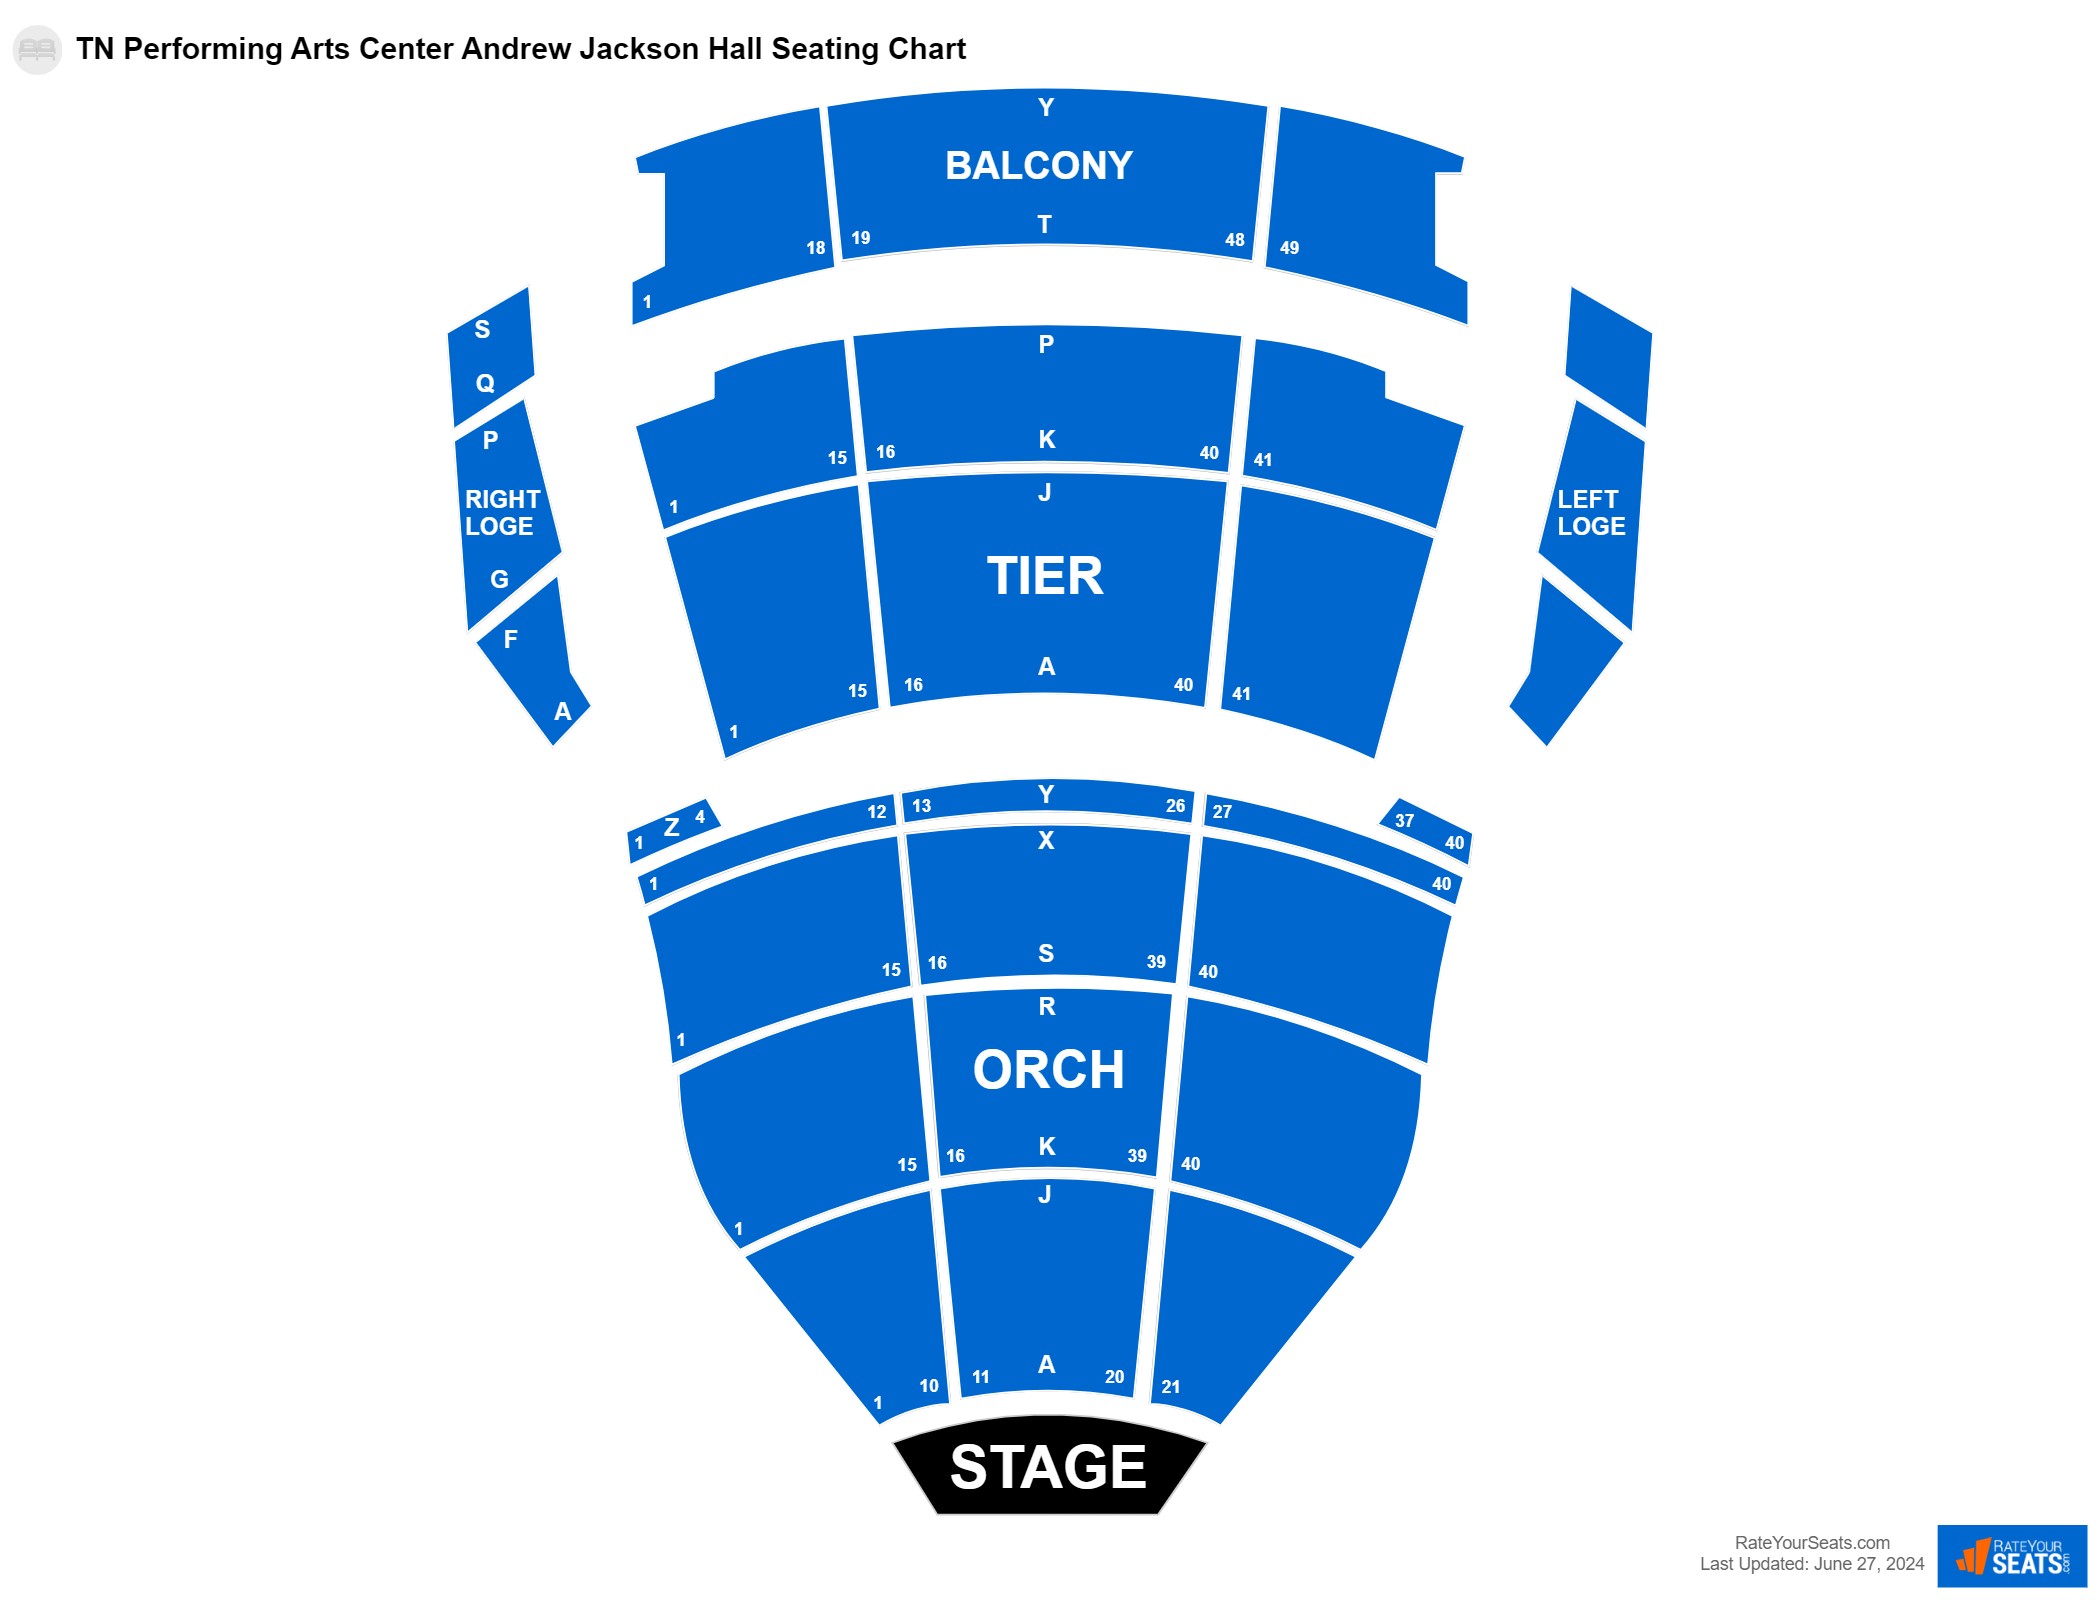 Concert seating chart at TN Performing Arts Center Andrew Jackson Hall